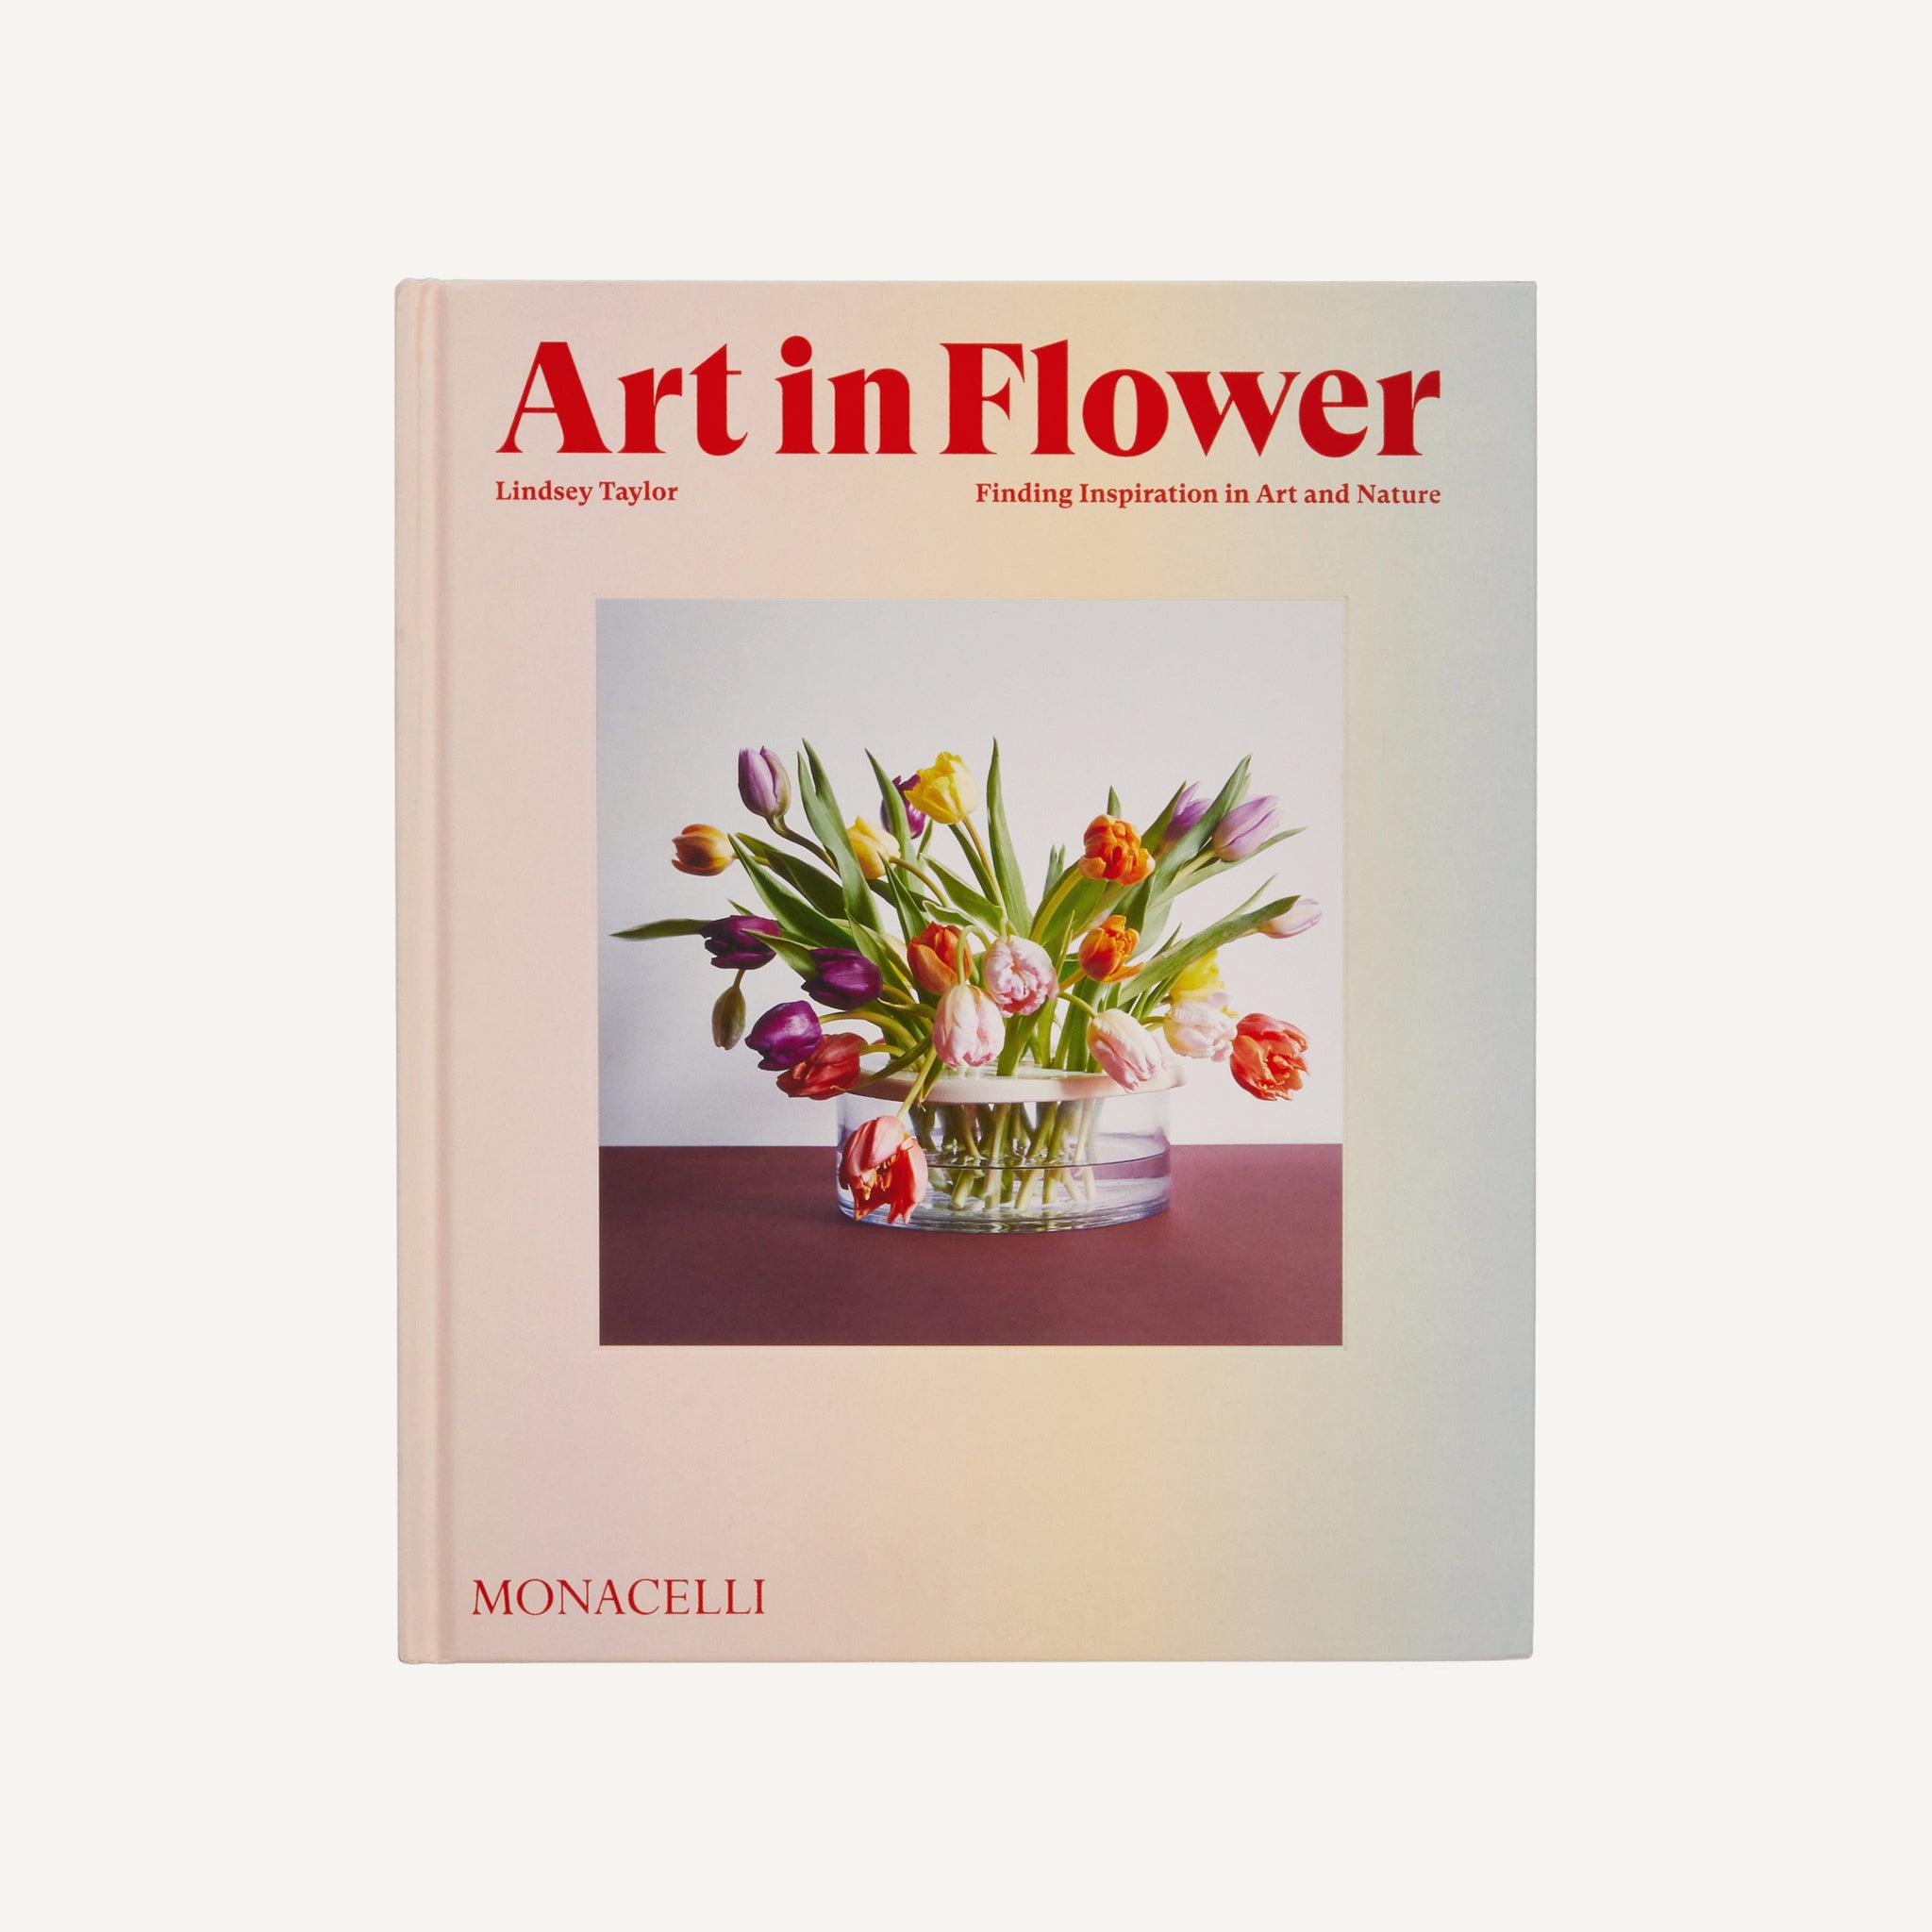 ART IN FLOWER: FINDING INSPIRATION IN ART AND NATURE